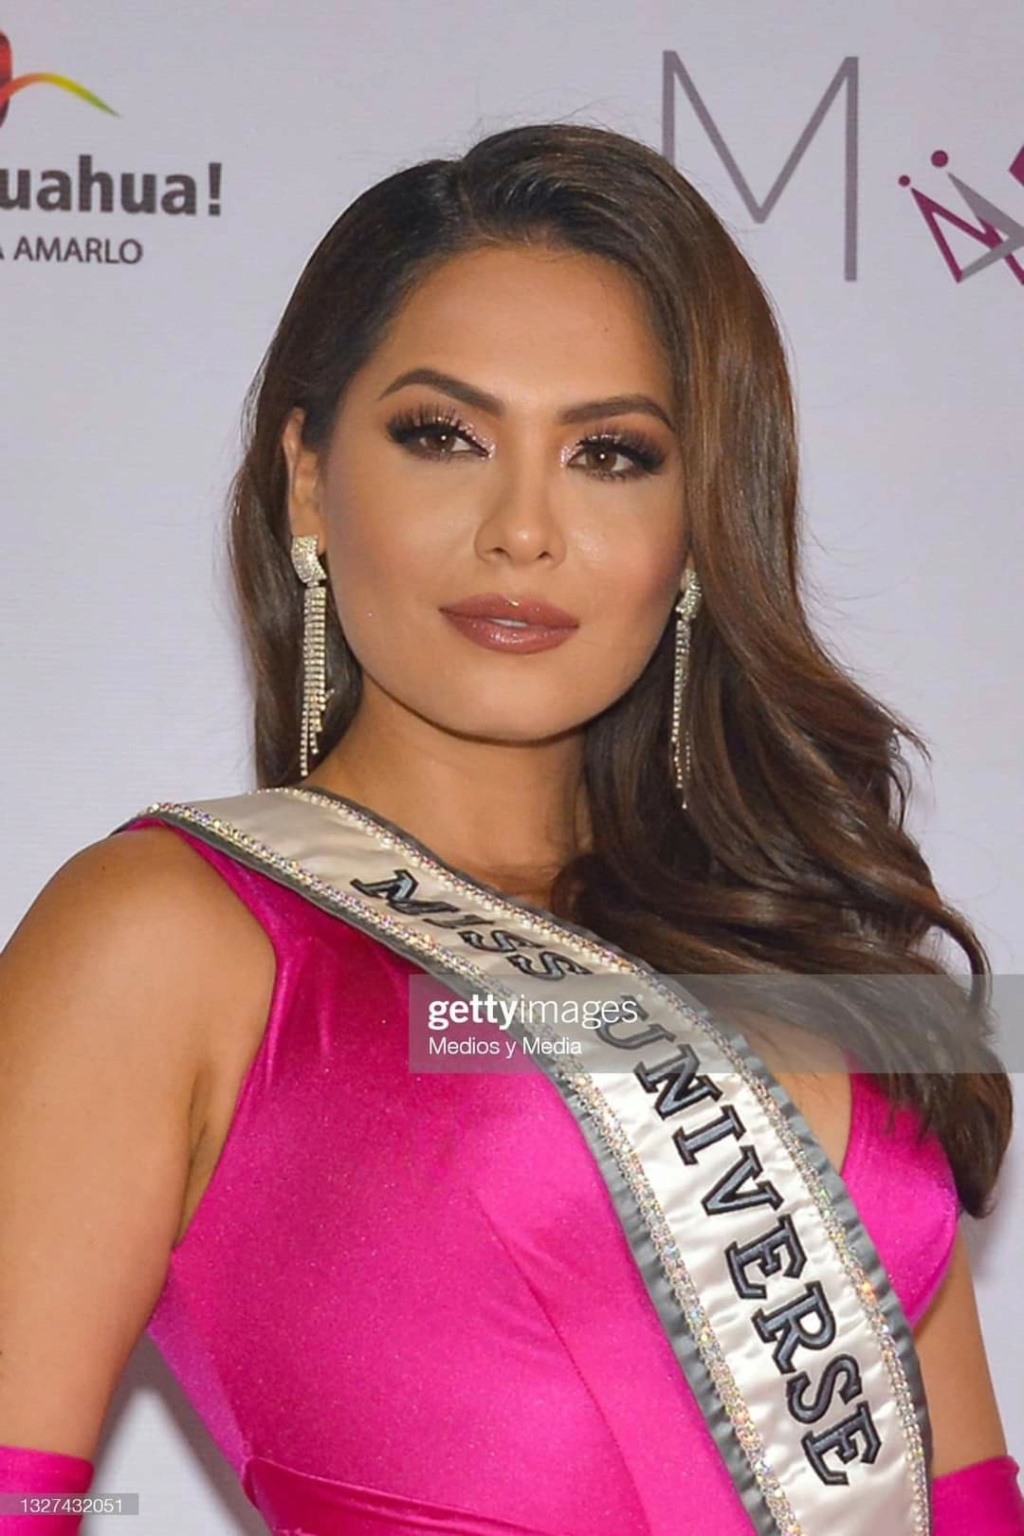 The Official Thread Of Miss Universe 2020 - Andrea Meza of Mexico  - Page 3 Fb_18347